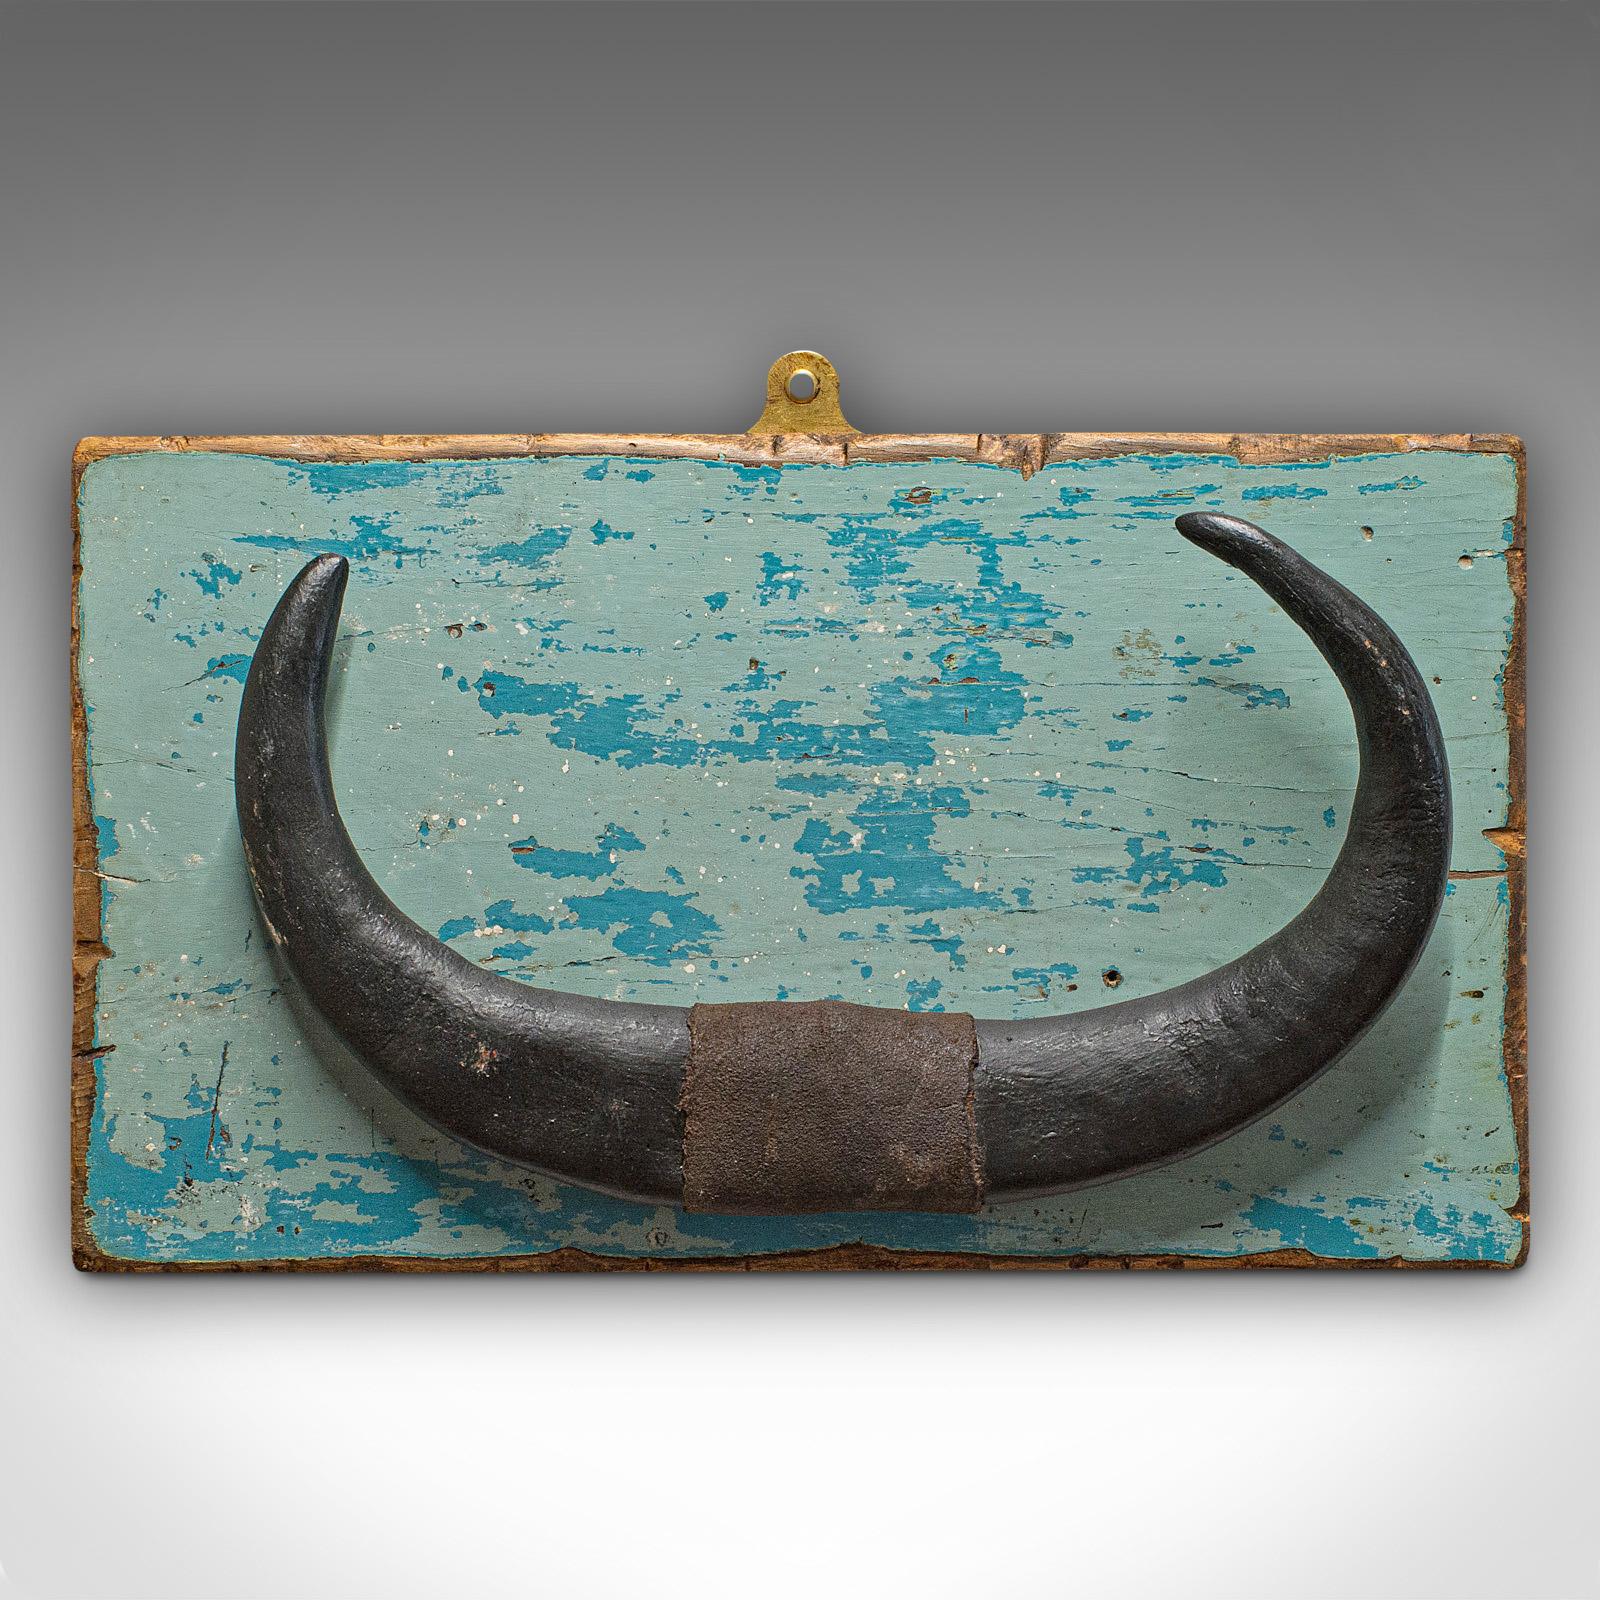 This is a vintage mounted horn. A Continental water buffalo display horn, dating to the mid-20th century.

Charming vintage display piece
Displaying a desirable aged patina
Painted pine in appealing naive finish
Leather bound horn mounted on a